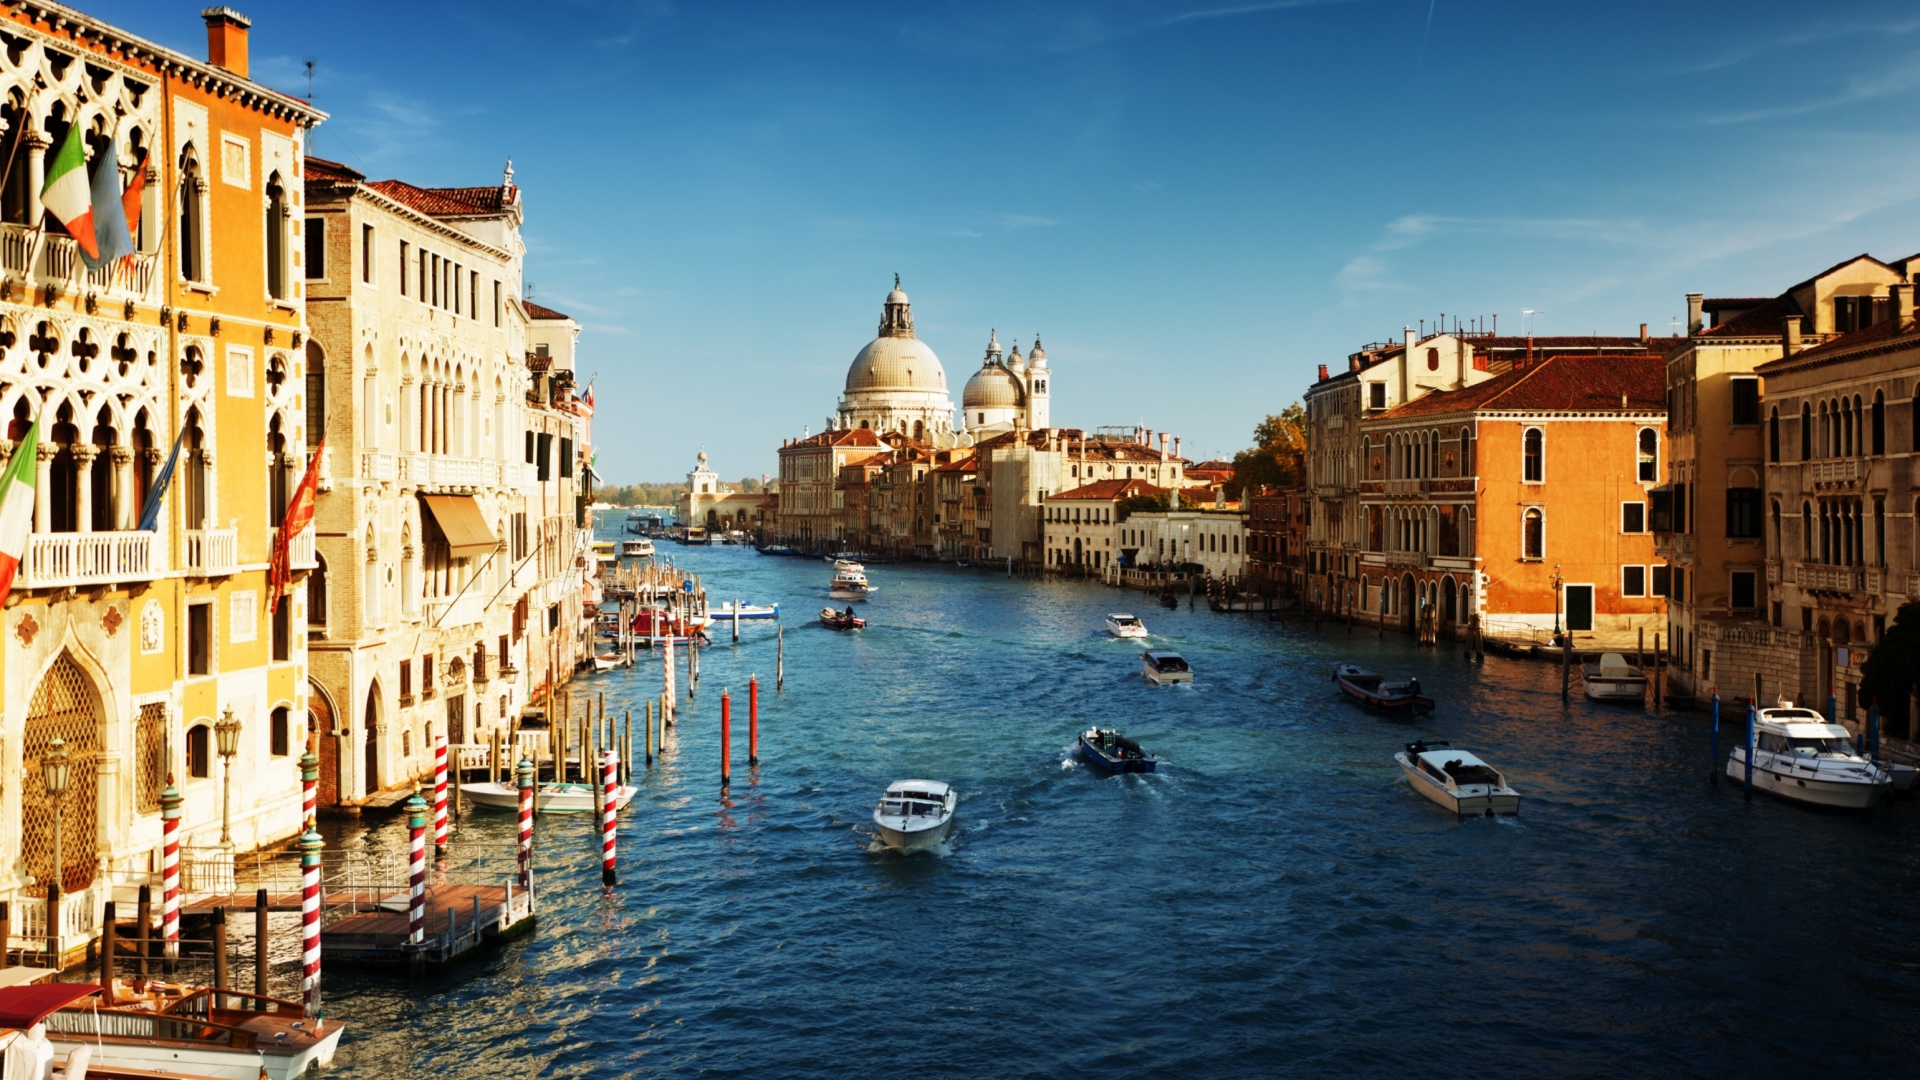 Venice, Italy, The Grand Canal screenshot #1 1920x1080